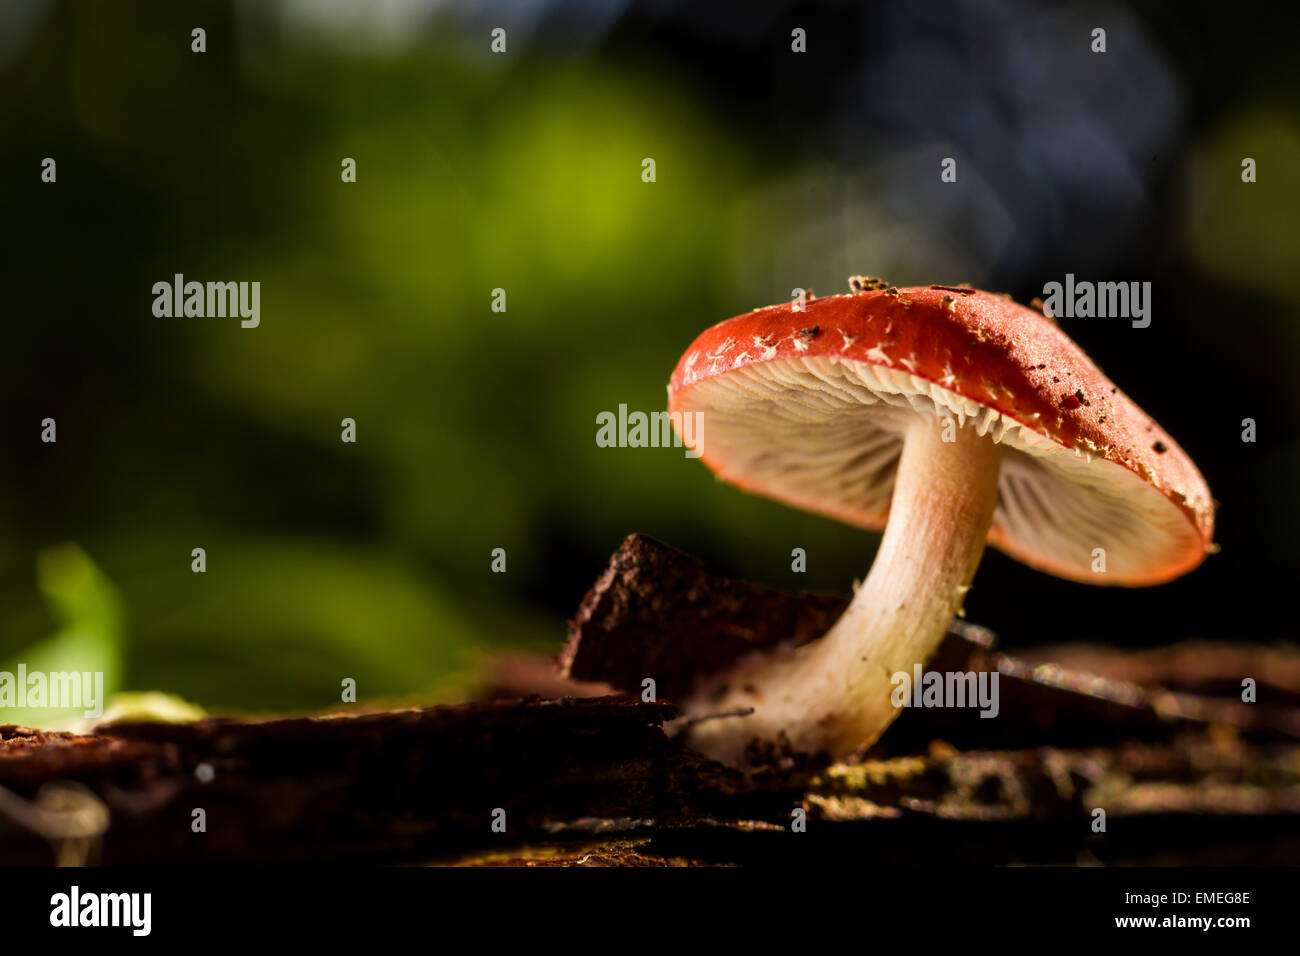 Fungi growing in the undergrowth during Autumn. St Mary's, Isles of Scilly, November. Stock Photo